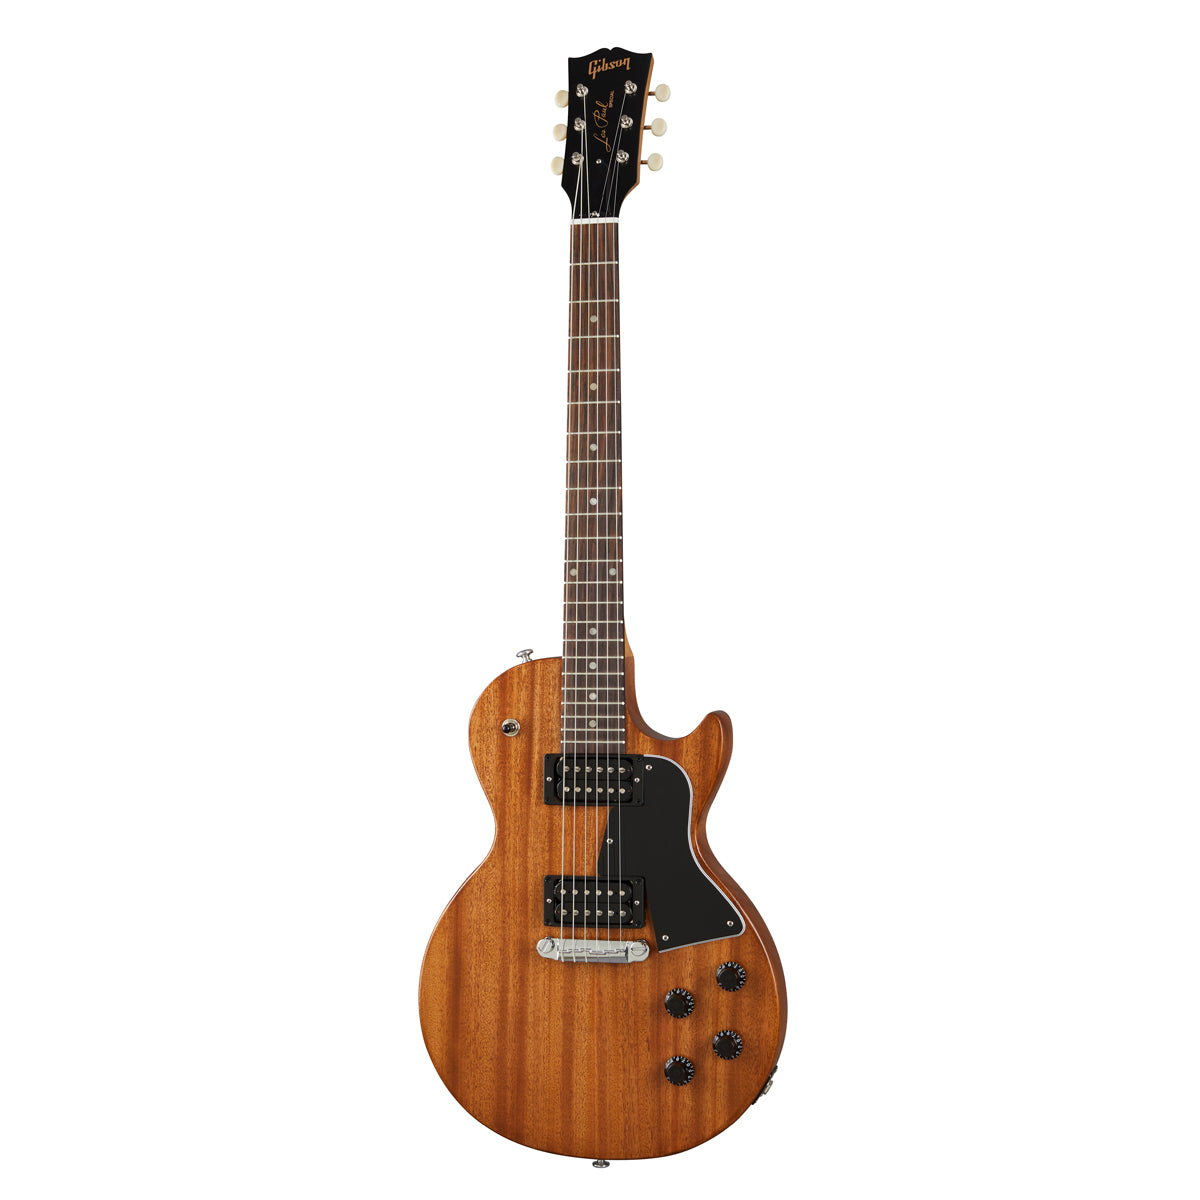 Gibson Les Paul Special Tribute LP Electric Guitar Natural Walnut Satin w/ Humbucker - LPSPTH015NCH1